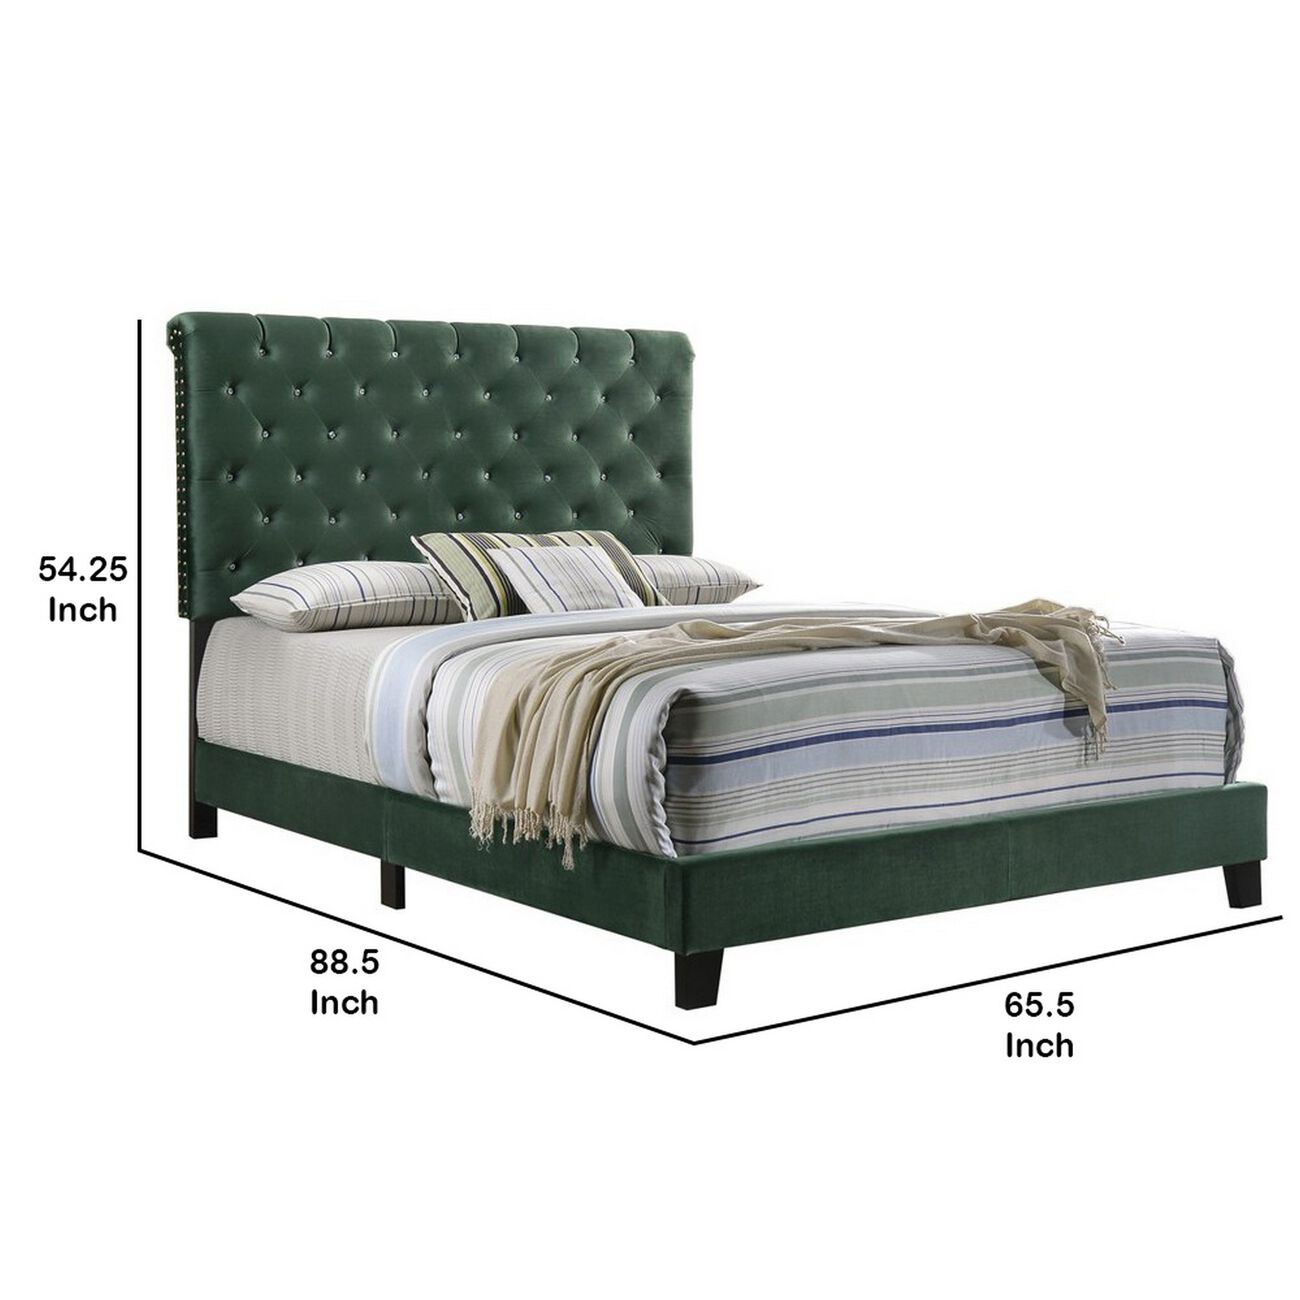 Fabric Upholstered Queen Size Bed with Scroll Headboard Design, Green